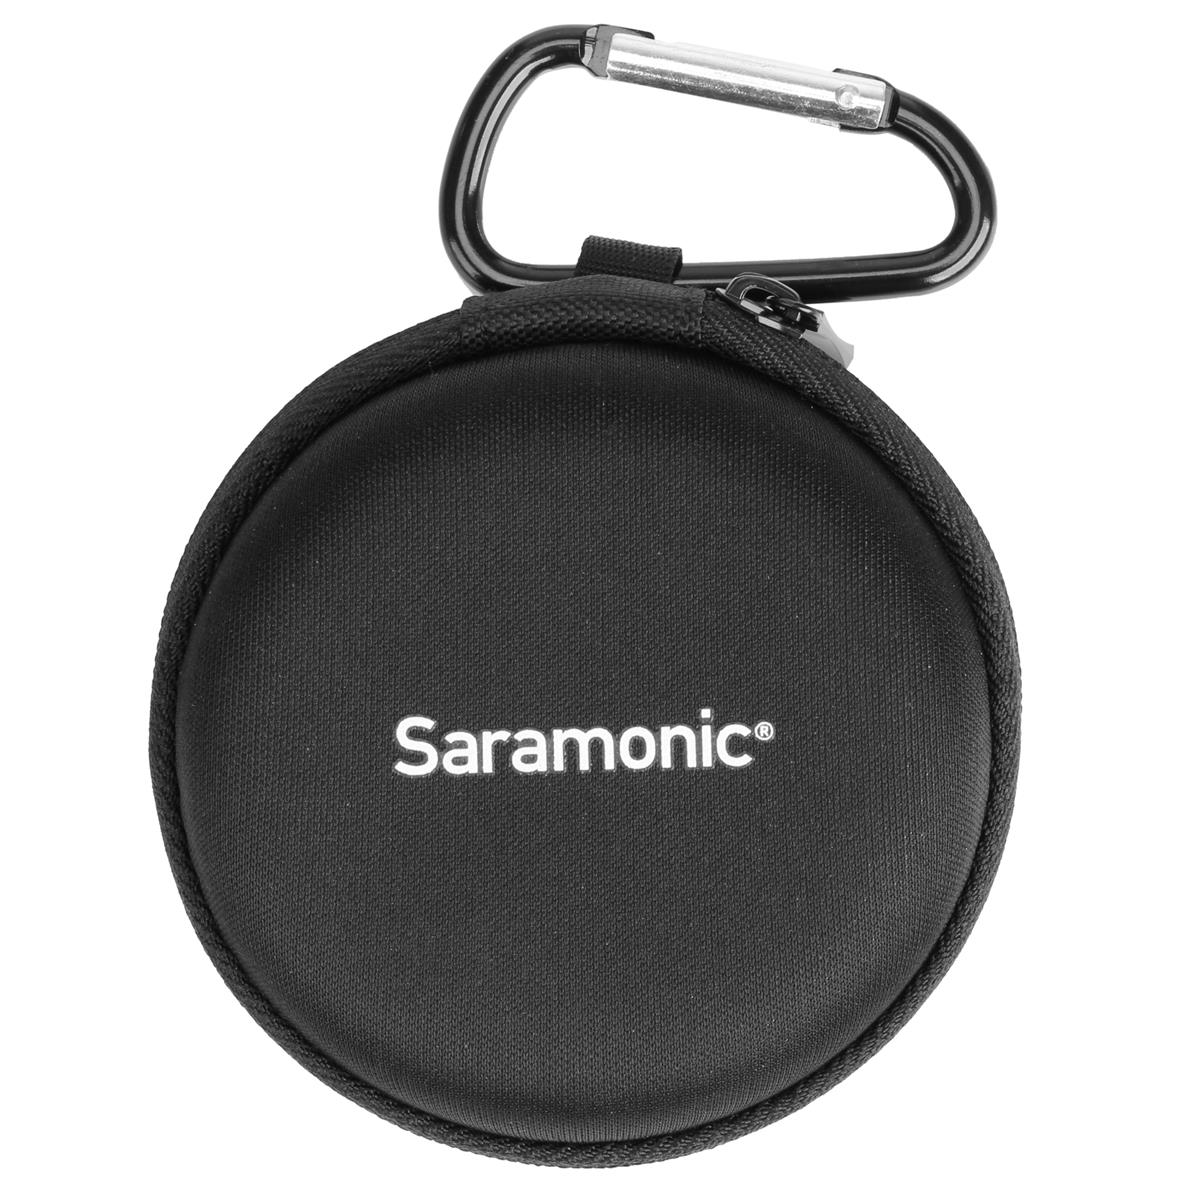 Image of Saramonic SR-CS1 Zippered Clamshell Lavalier Protective Case with Carabiner